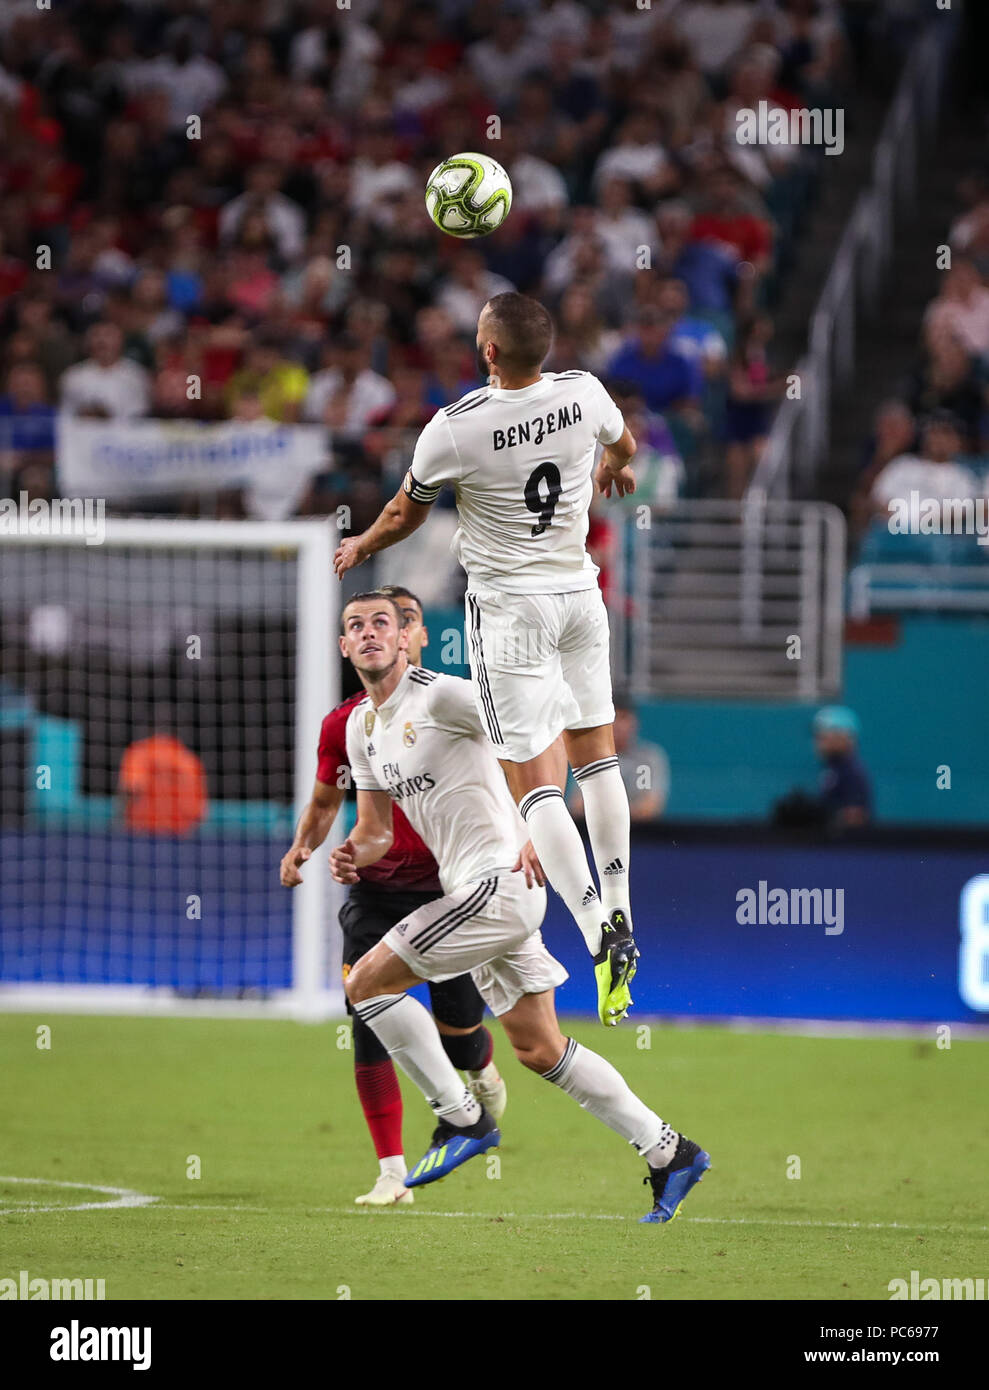 Miami Gardens, Florida, USA. 31st July, 2018. Real Madrid C.F. forward Karim Mostafa Benzema (9) leaps to head the ball during an International Champions Cup match between Real Madrid C.F. and Manchester United F.C. at the Hard Rock Stadium in Miami Gardens, Florida. Manchester United F.C. won the game 2-1. Credit: Mario Houben/ZUMA Wire/Alamy Live News Stock Photo